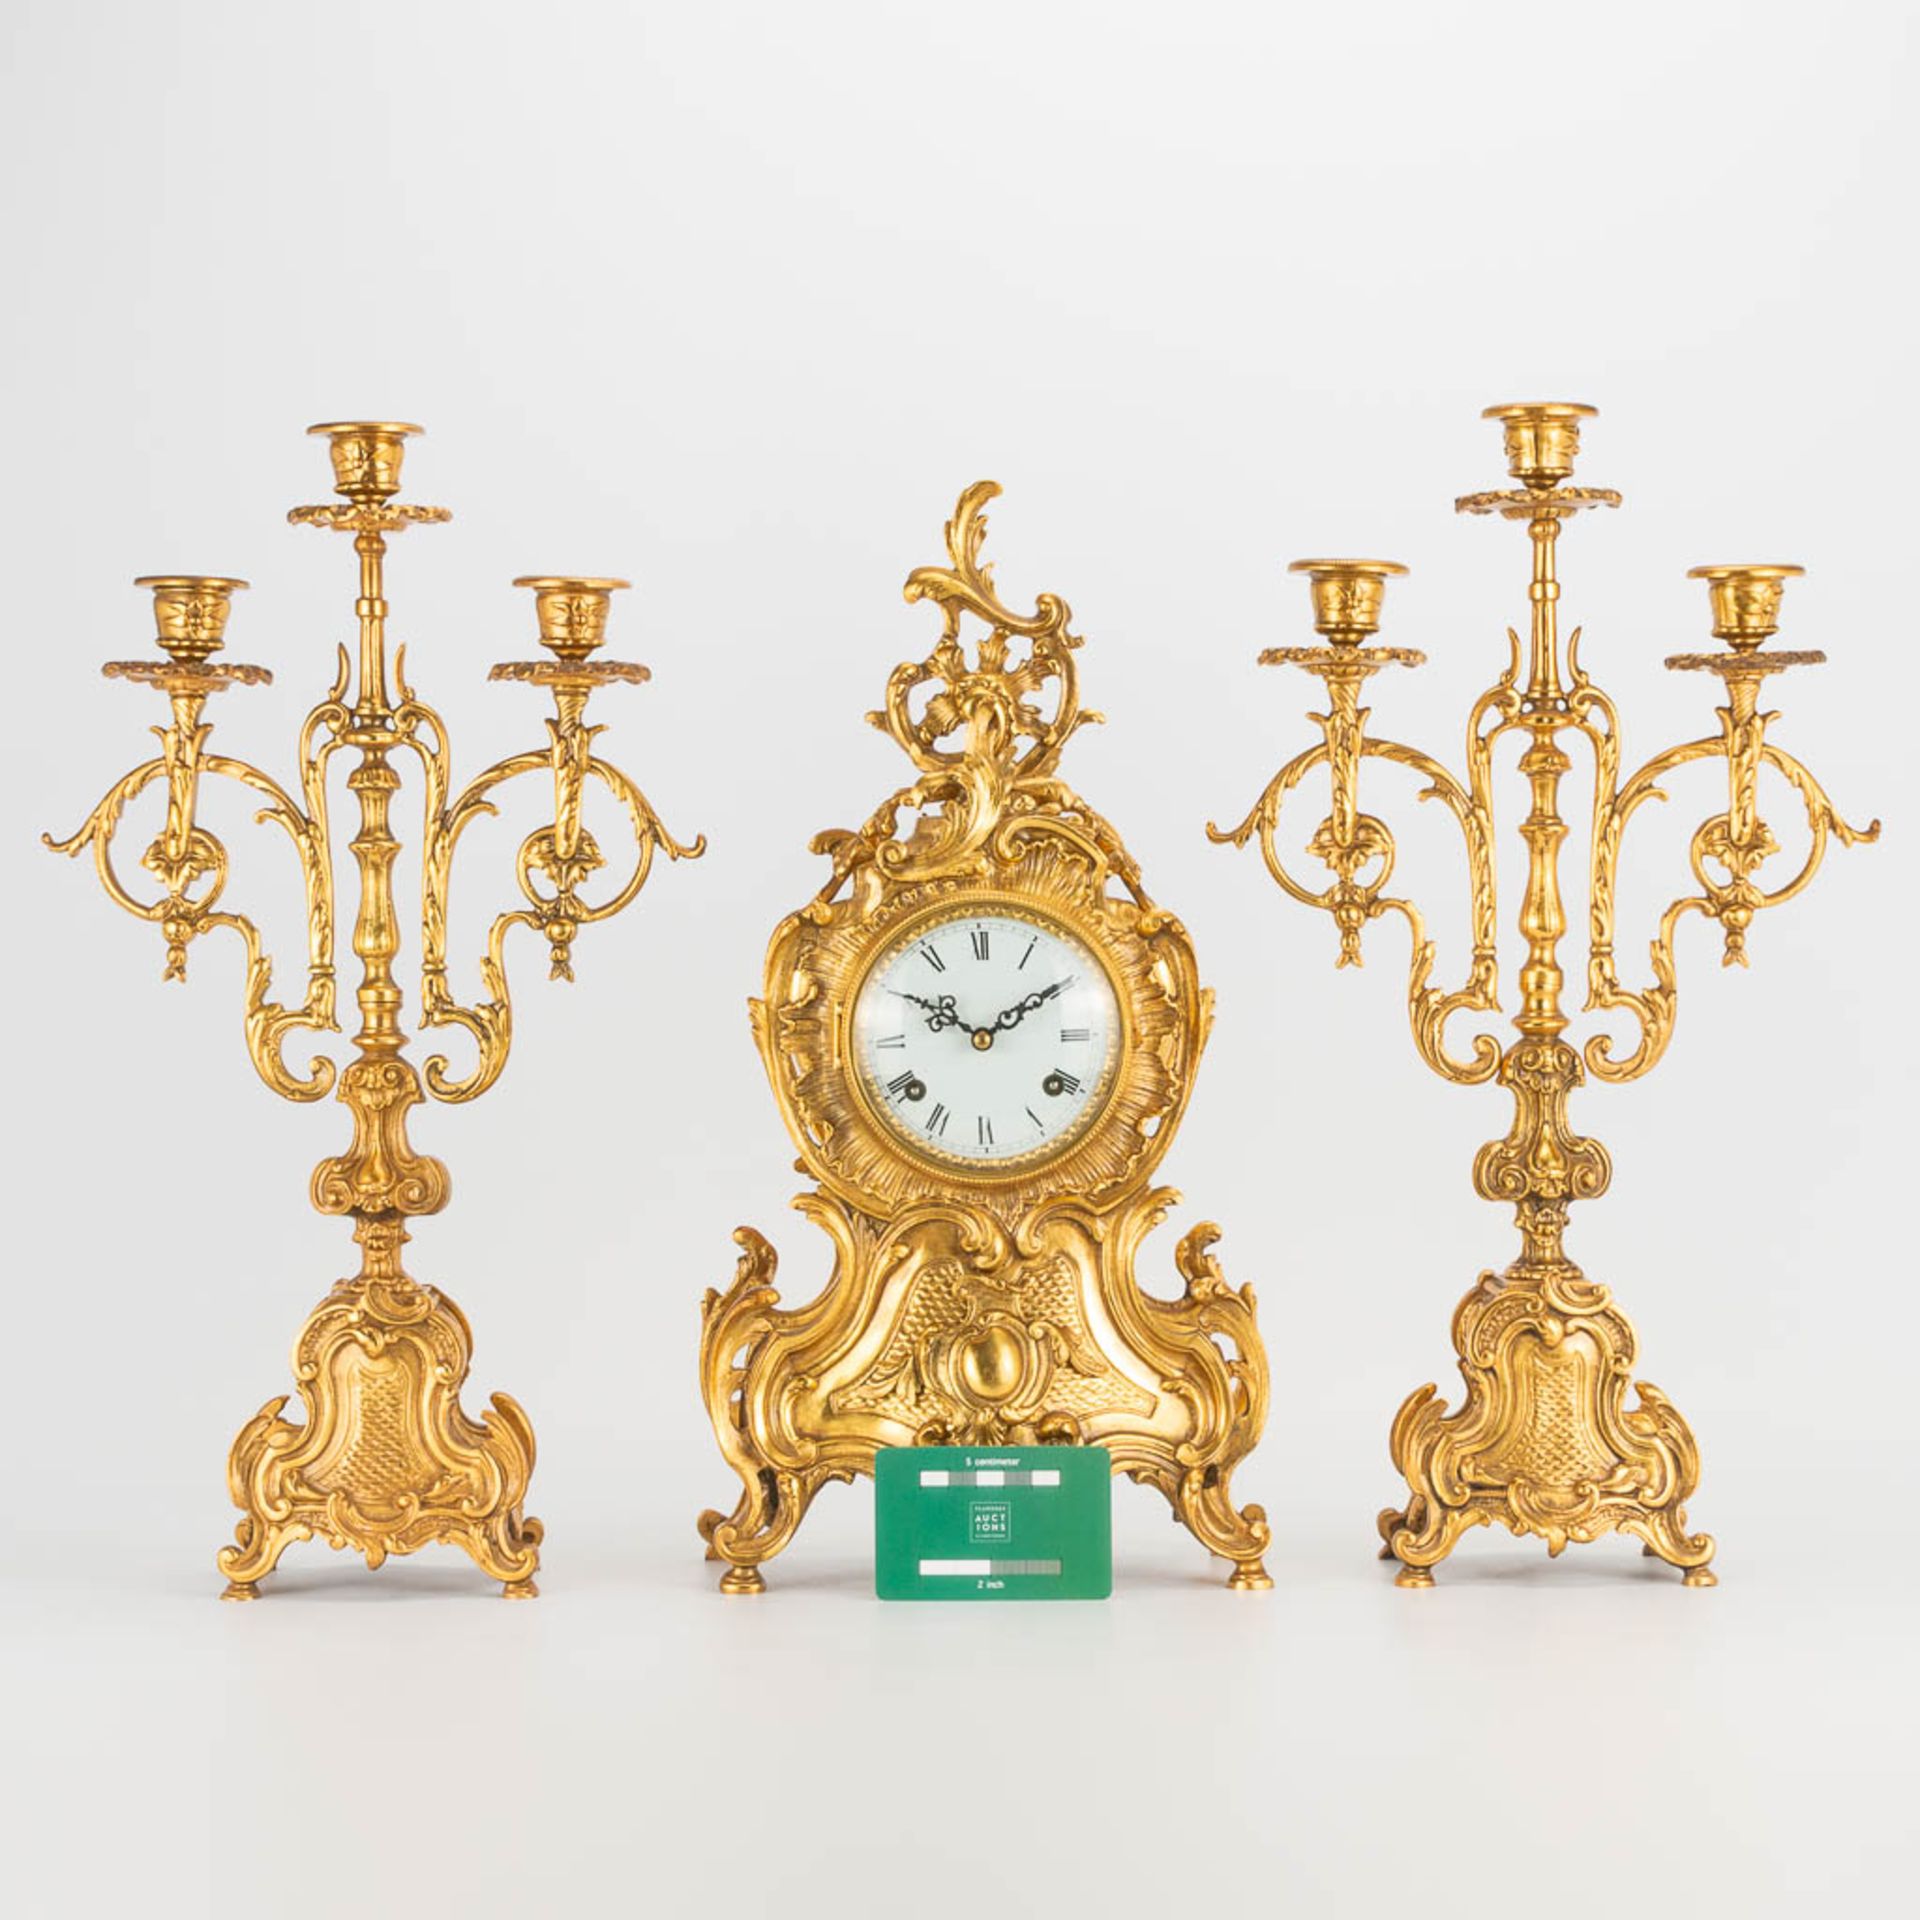 A 3 piece garniture clockset made of bronze, consisting of a clock and 2 candelabra. (9 x 22 x 41 cm - Image 3 of 17